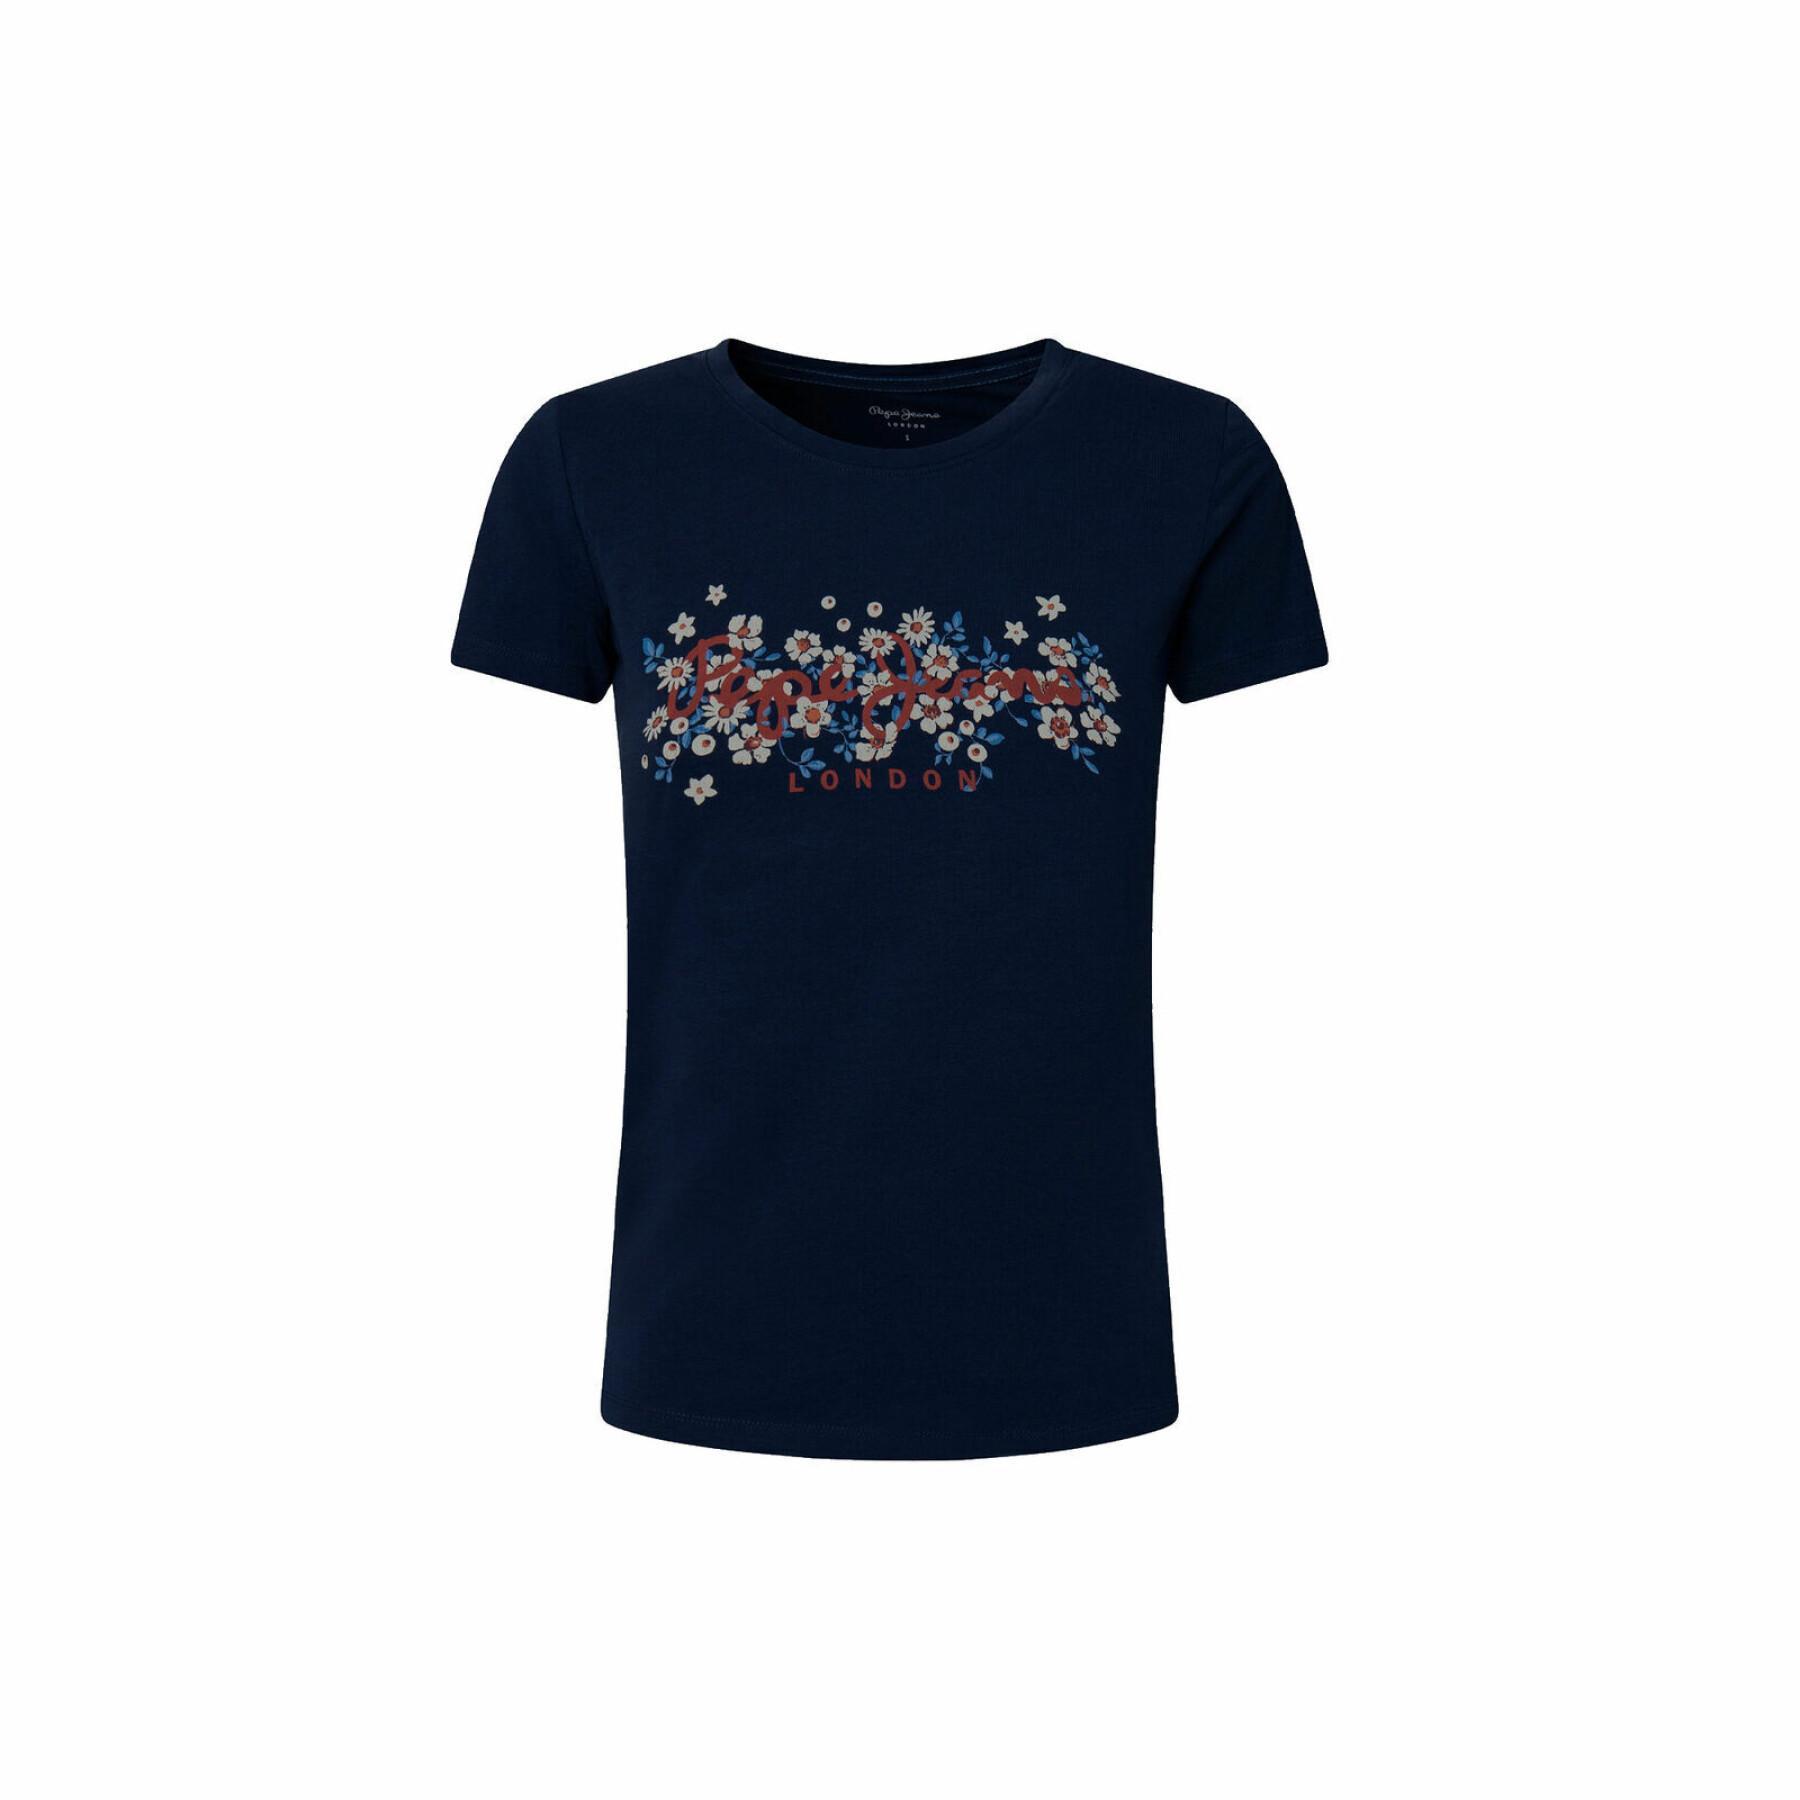 Women's T-shirt Pepe Jeans Bego